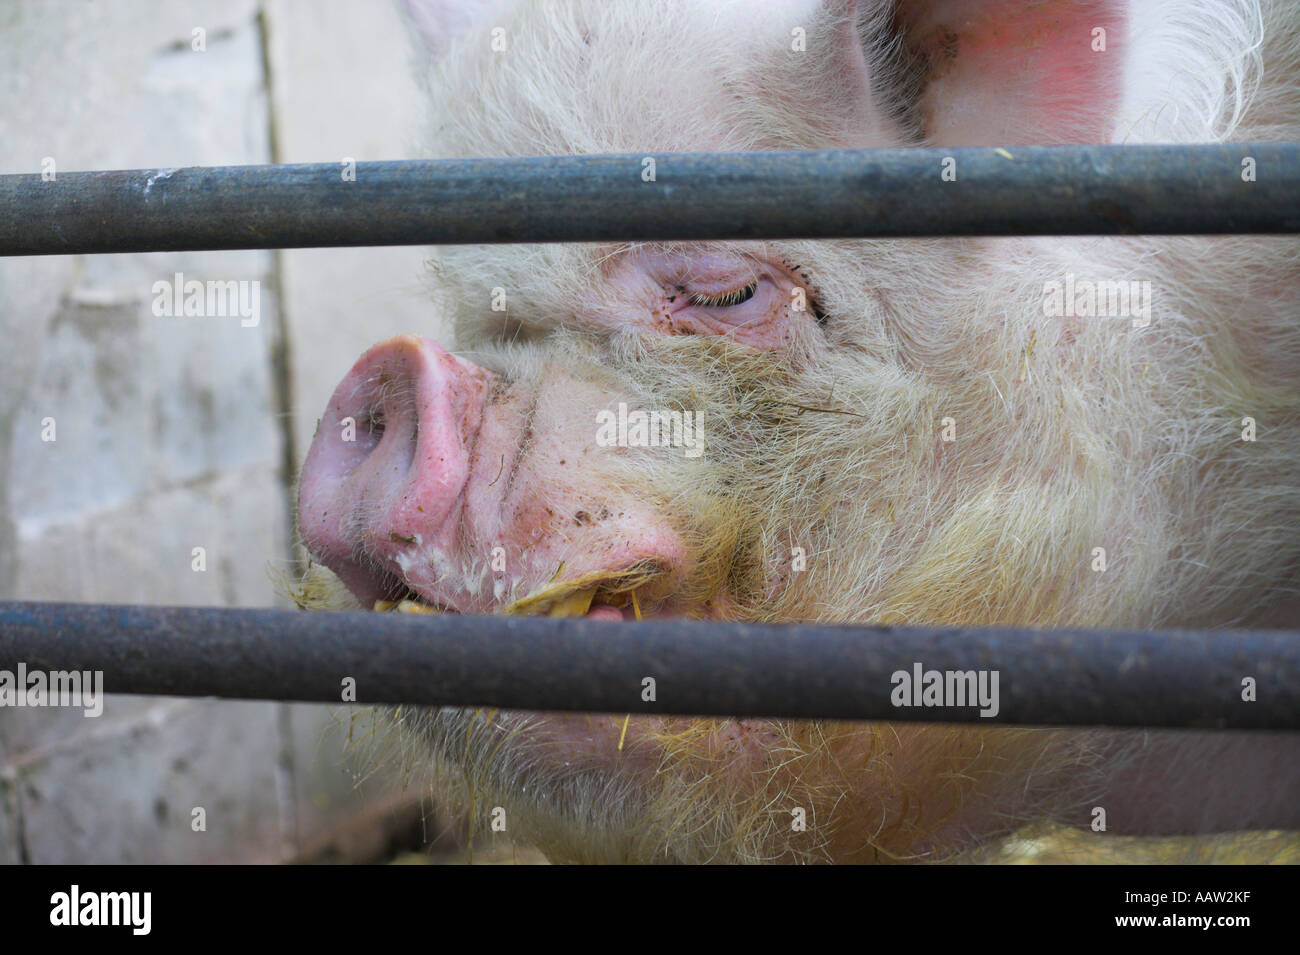 Head of [Rare Breed] 'Middle White' Pig [behind bars] in pigsty Stock Photo